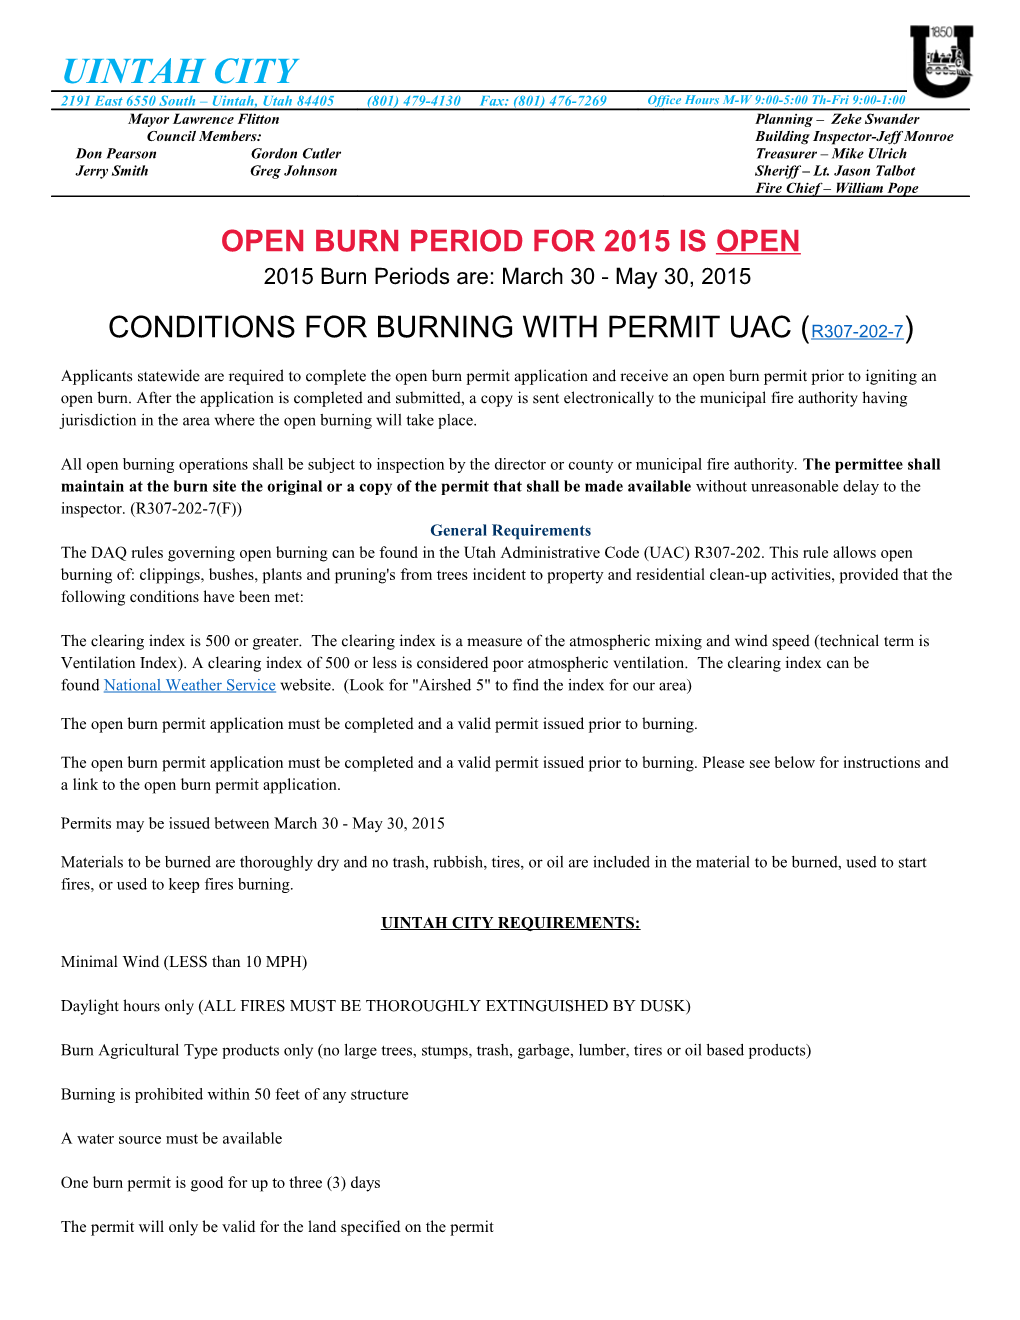 Conditions for Burning with Permit Uac (R307-202-7)